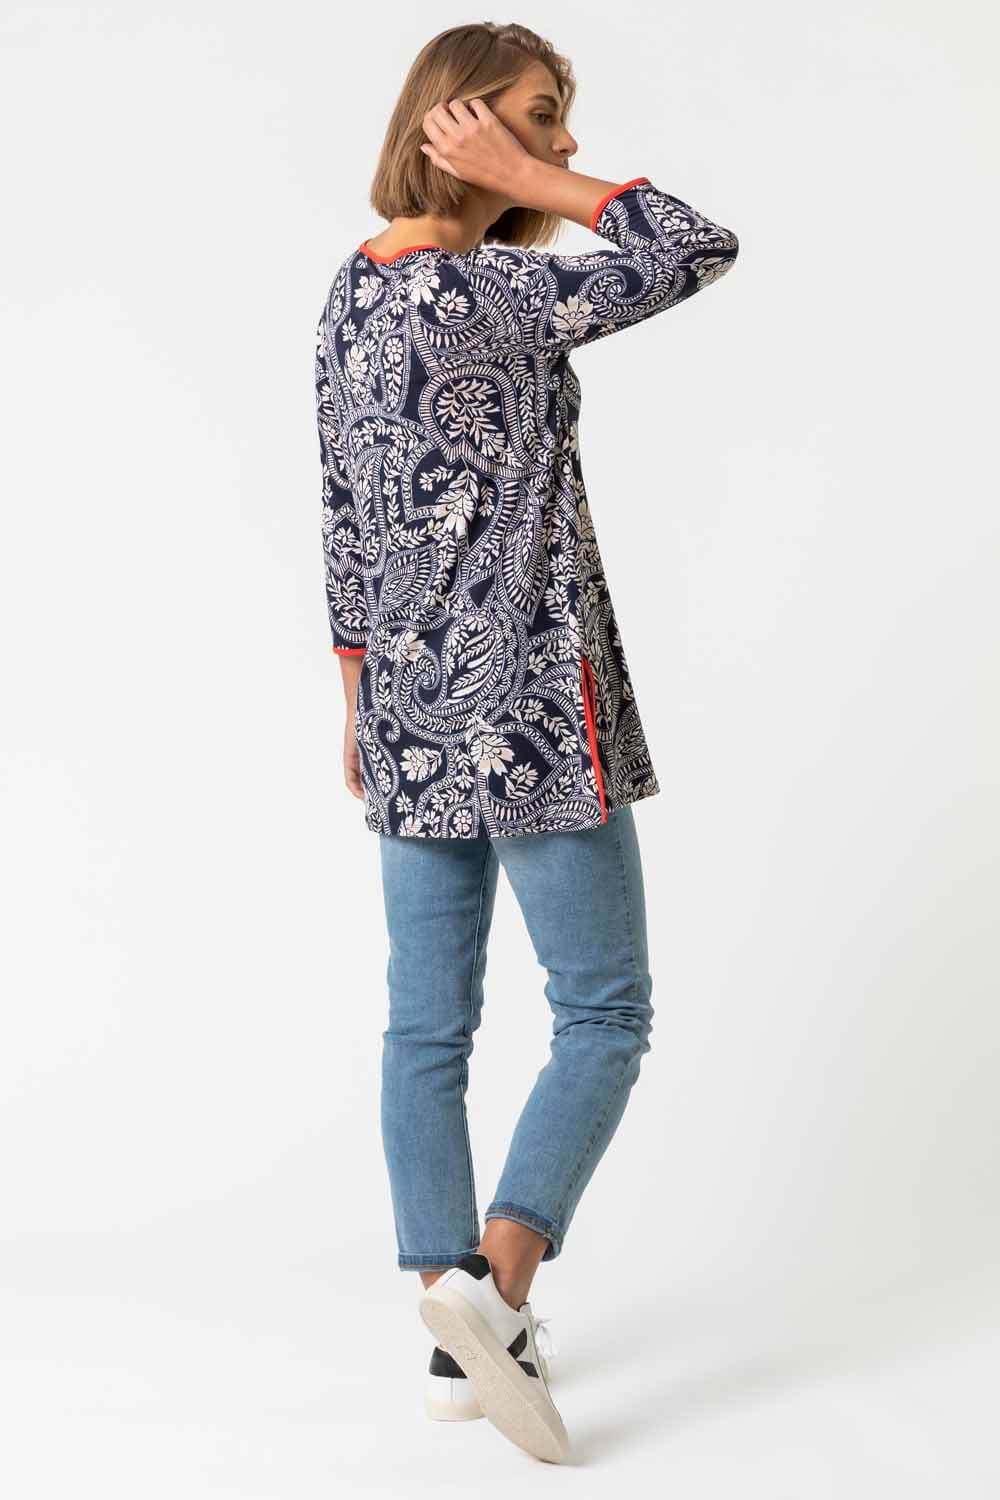 Navy  Paisley Print Contrast Trim Tunic Top, Image 2 of 4